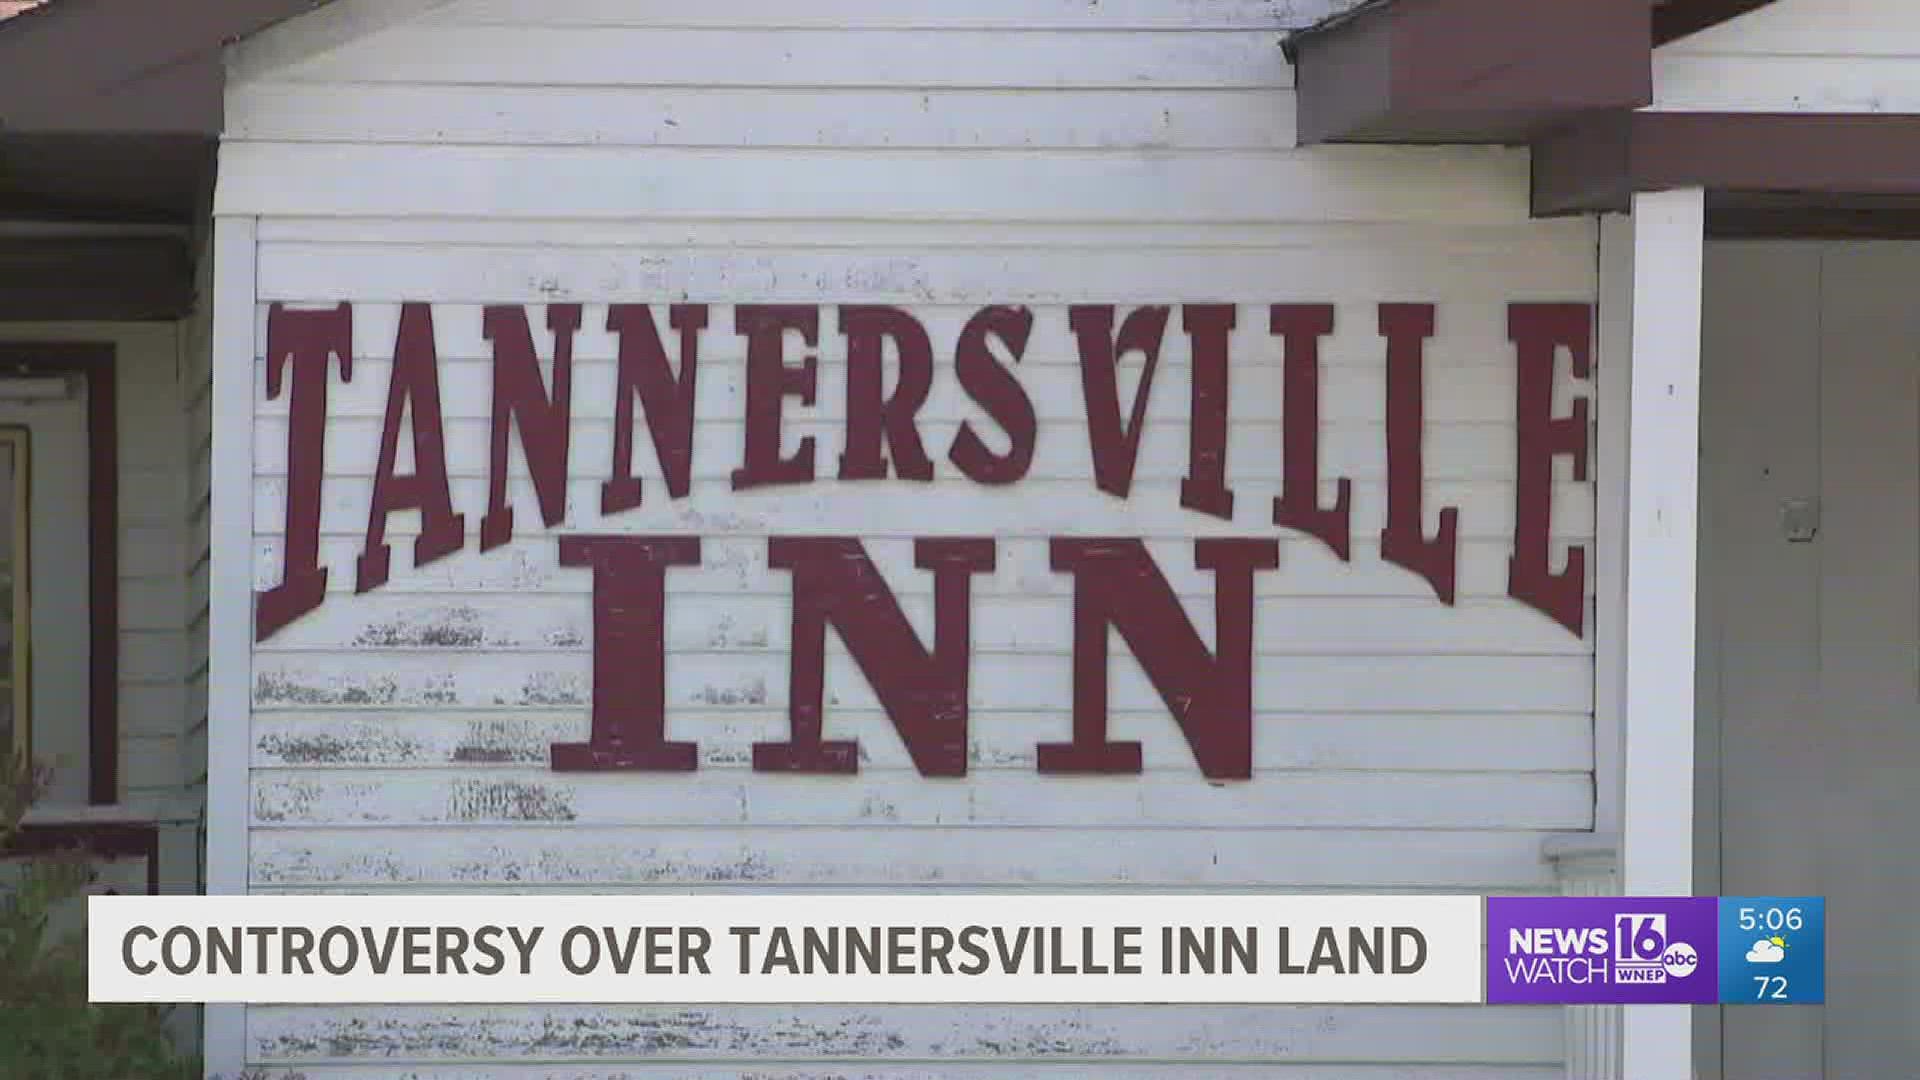 Pocono Township received plans for a proposed Wawa to replace the Old Tannersville Inn.